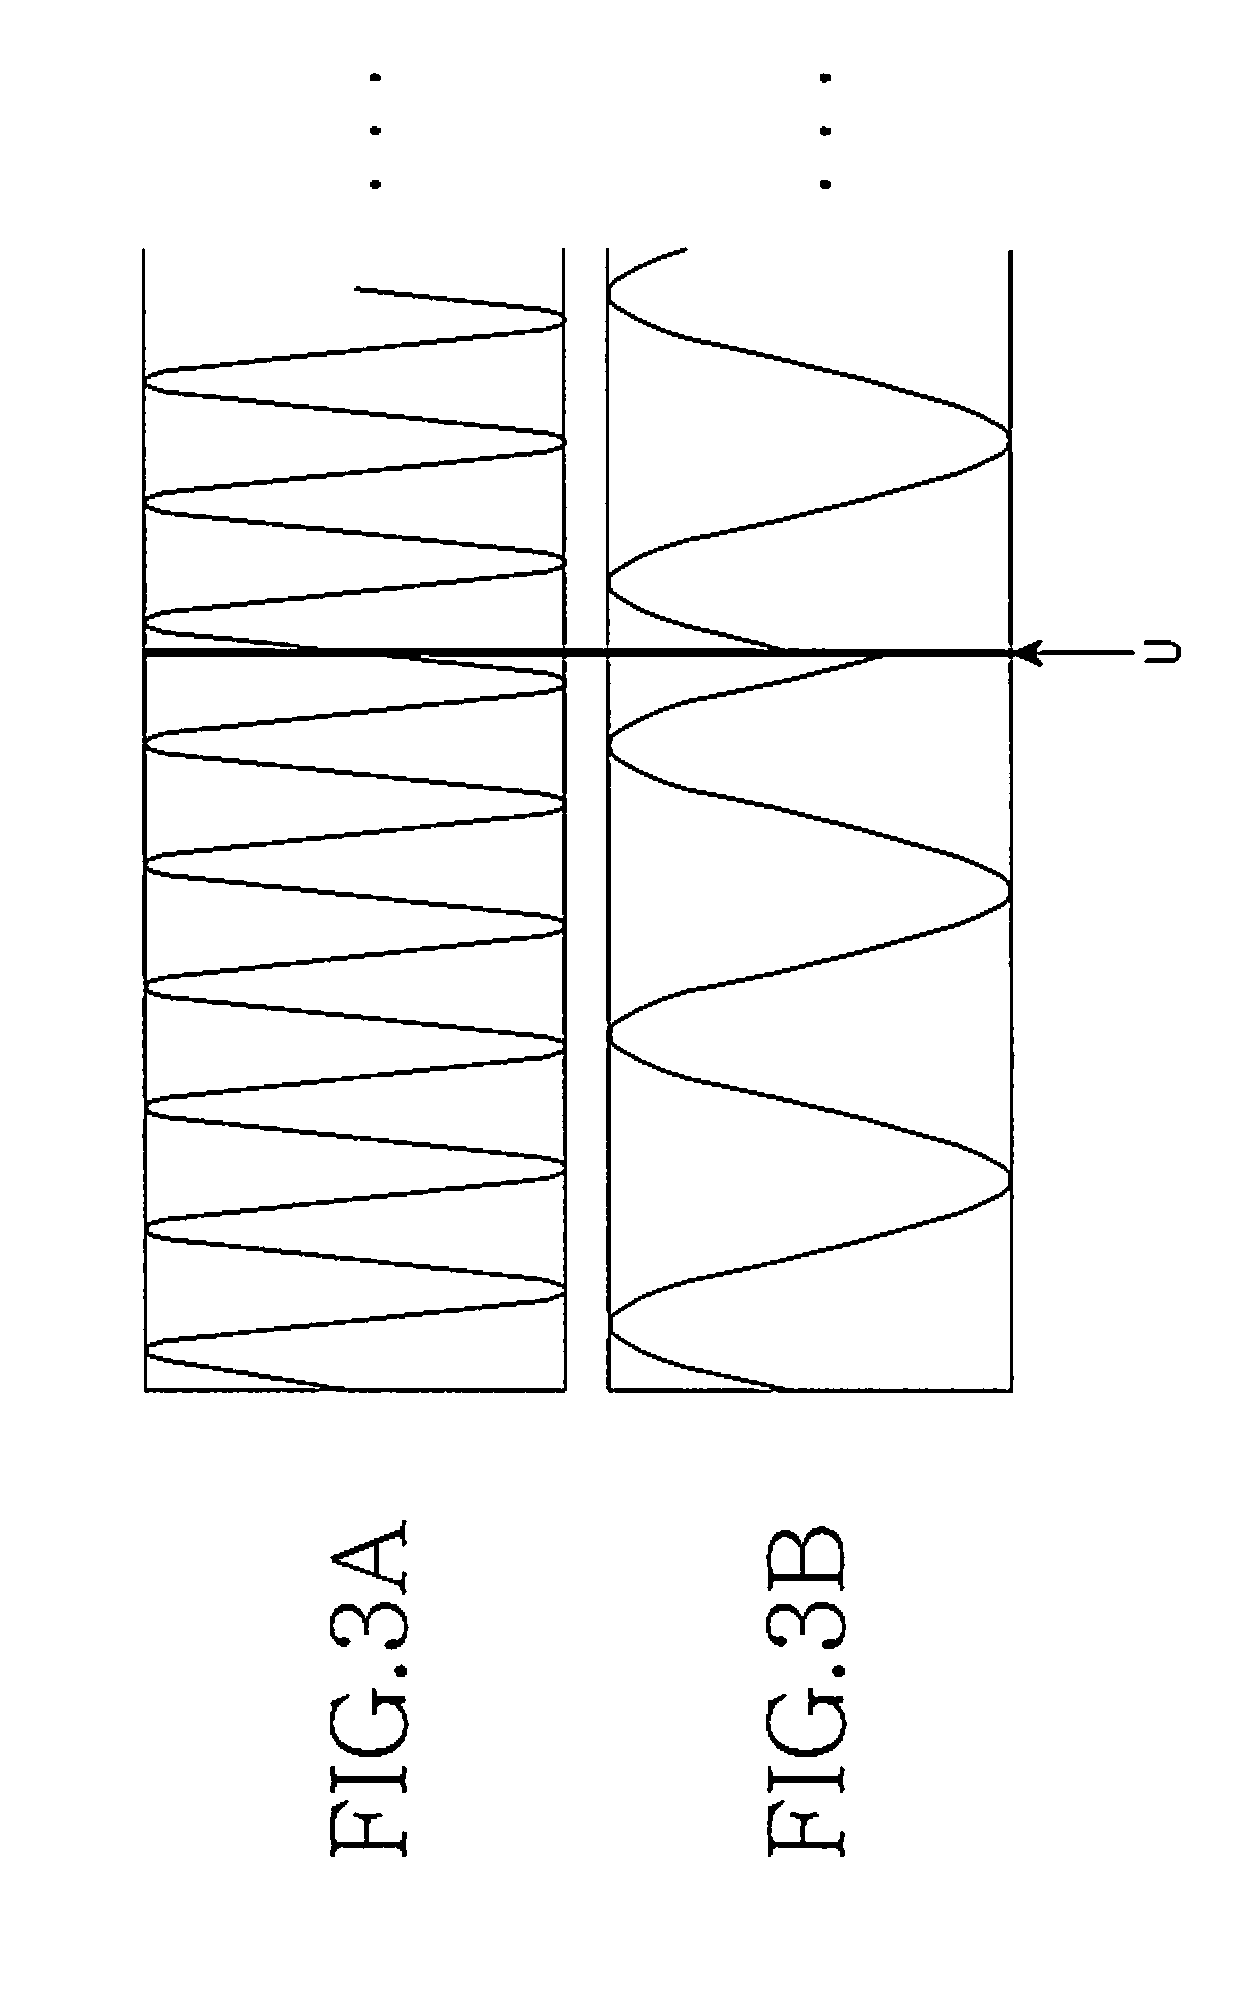 Haptic function control method for portable terminals